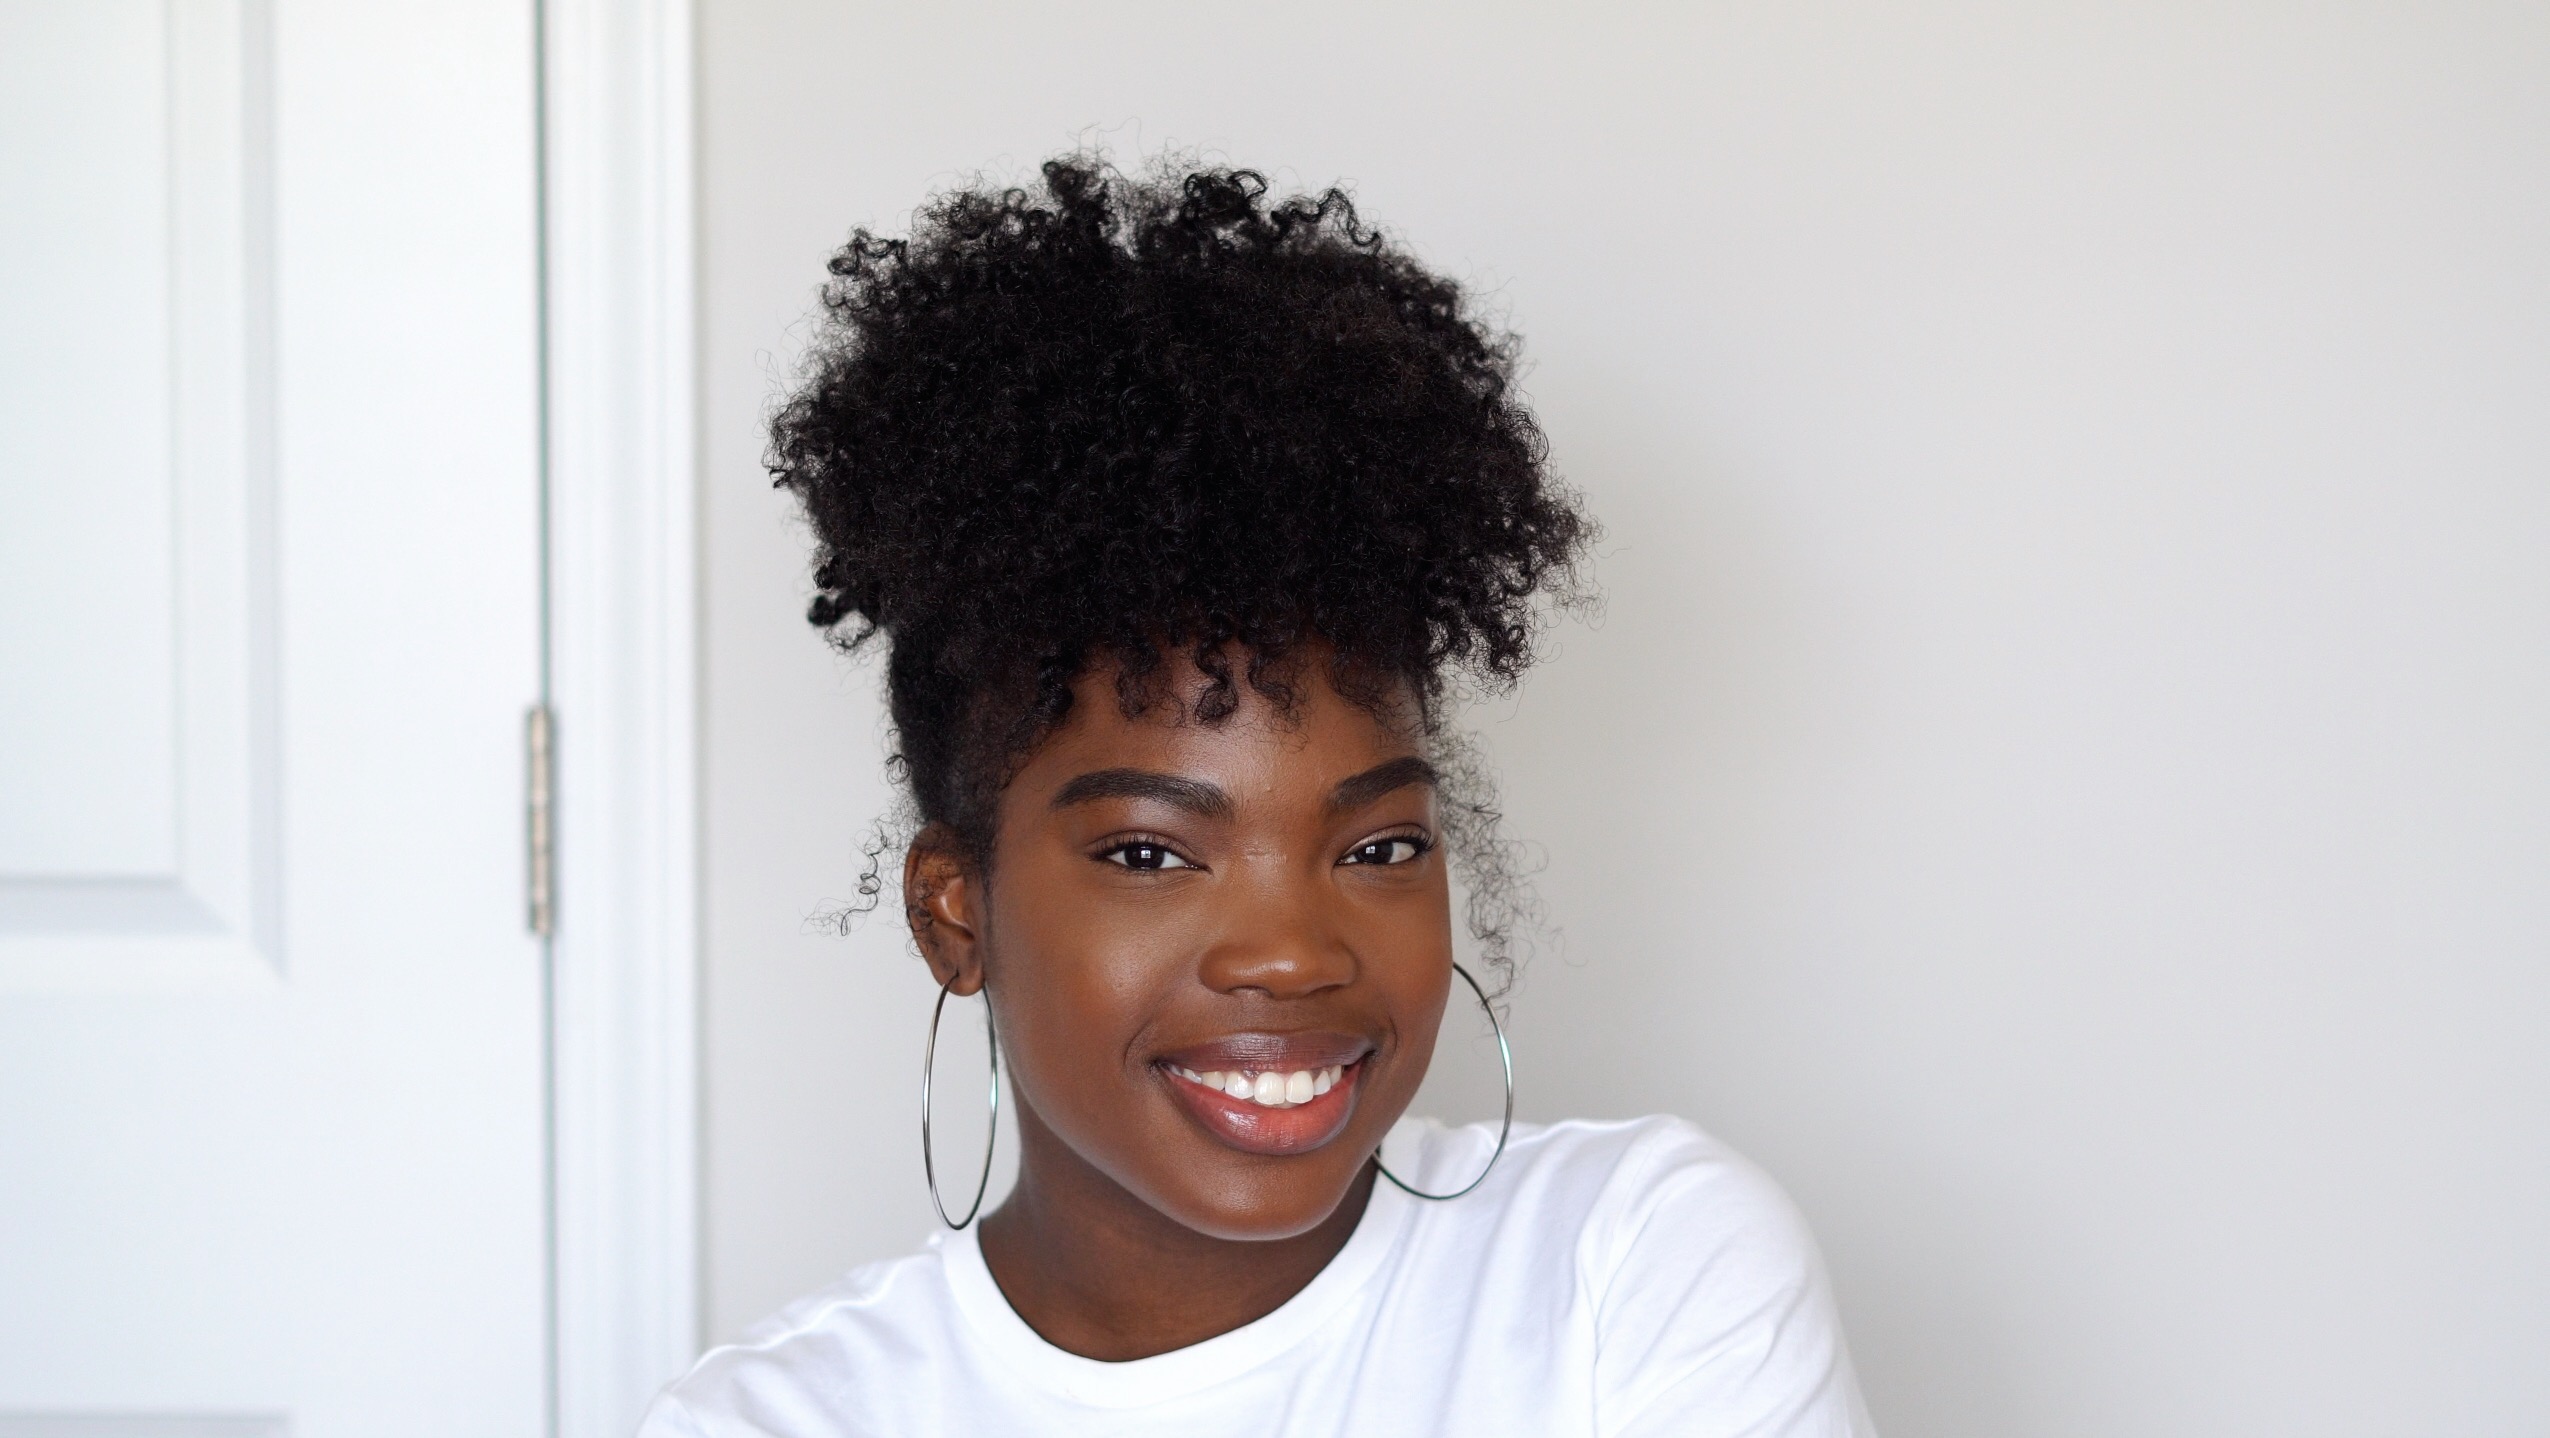 Natural Hair Mag - Cute Twist Hairstyle and Braid Out on Natural Hair Photo  Credit: JessCreationss https://www.naturalhairmag.com/twist-hairstyle-braid- out-natural/ | Facebook